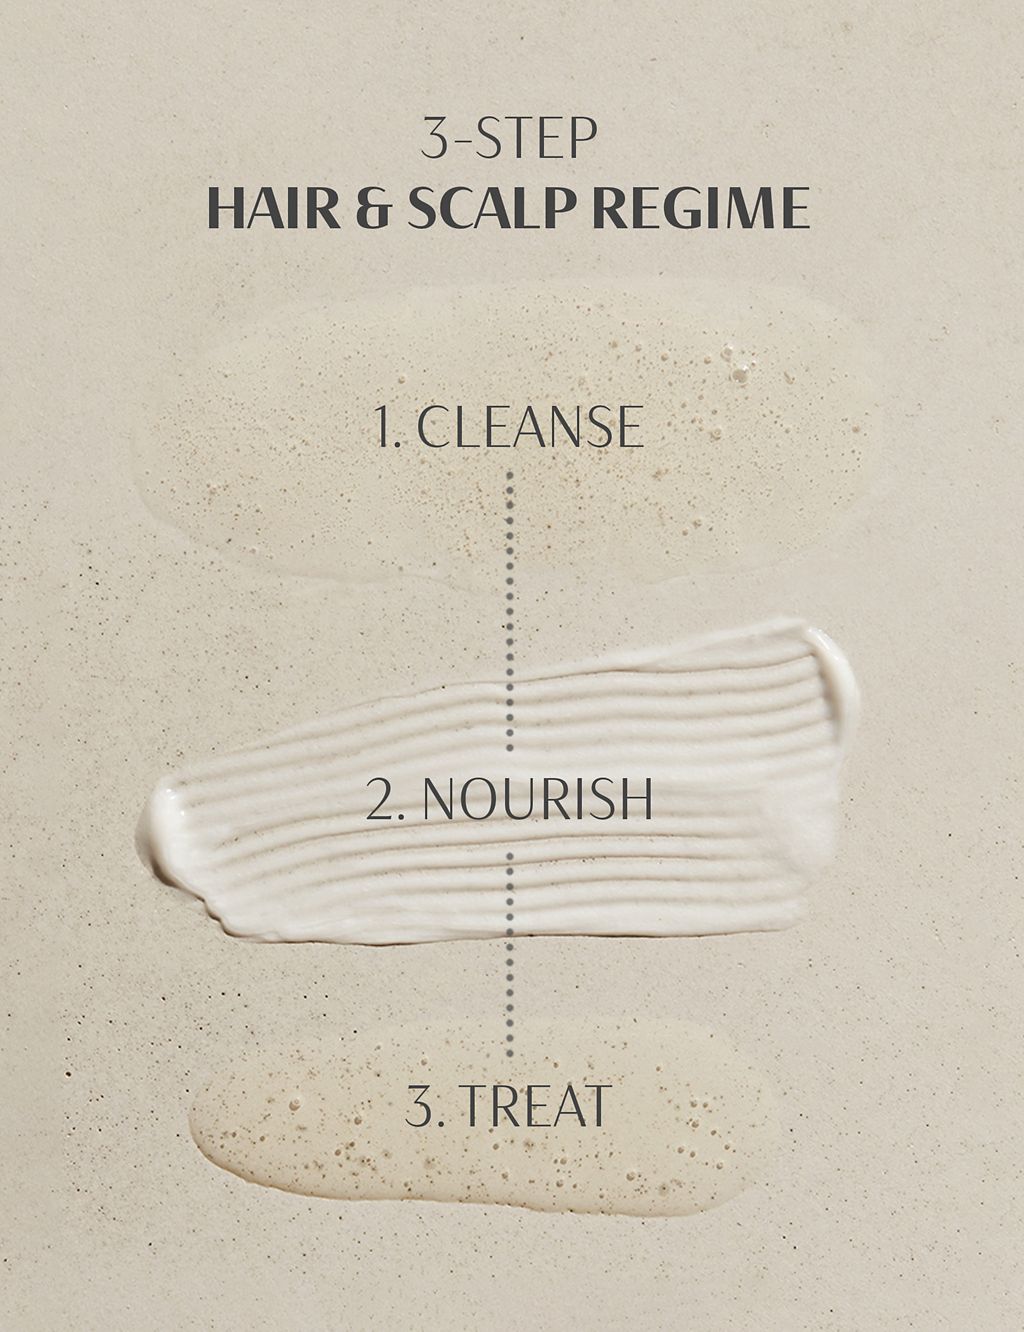 Give Me Strength Hair & Scalp Regime 2 of 7